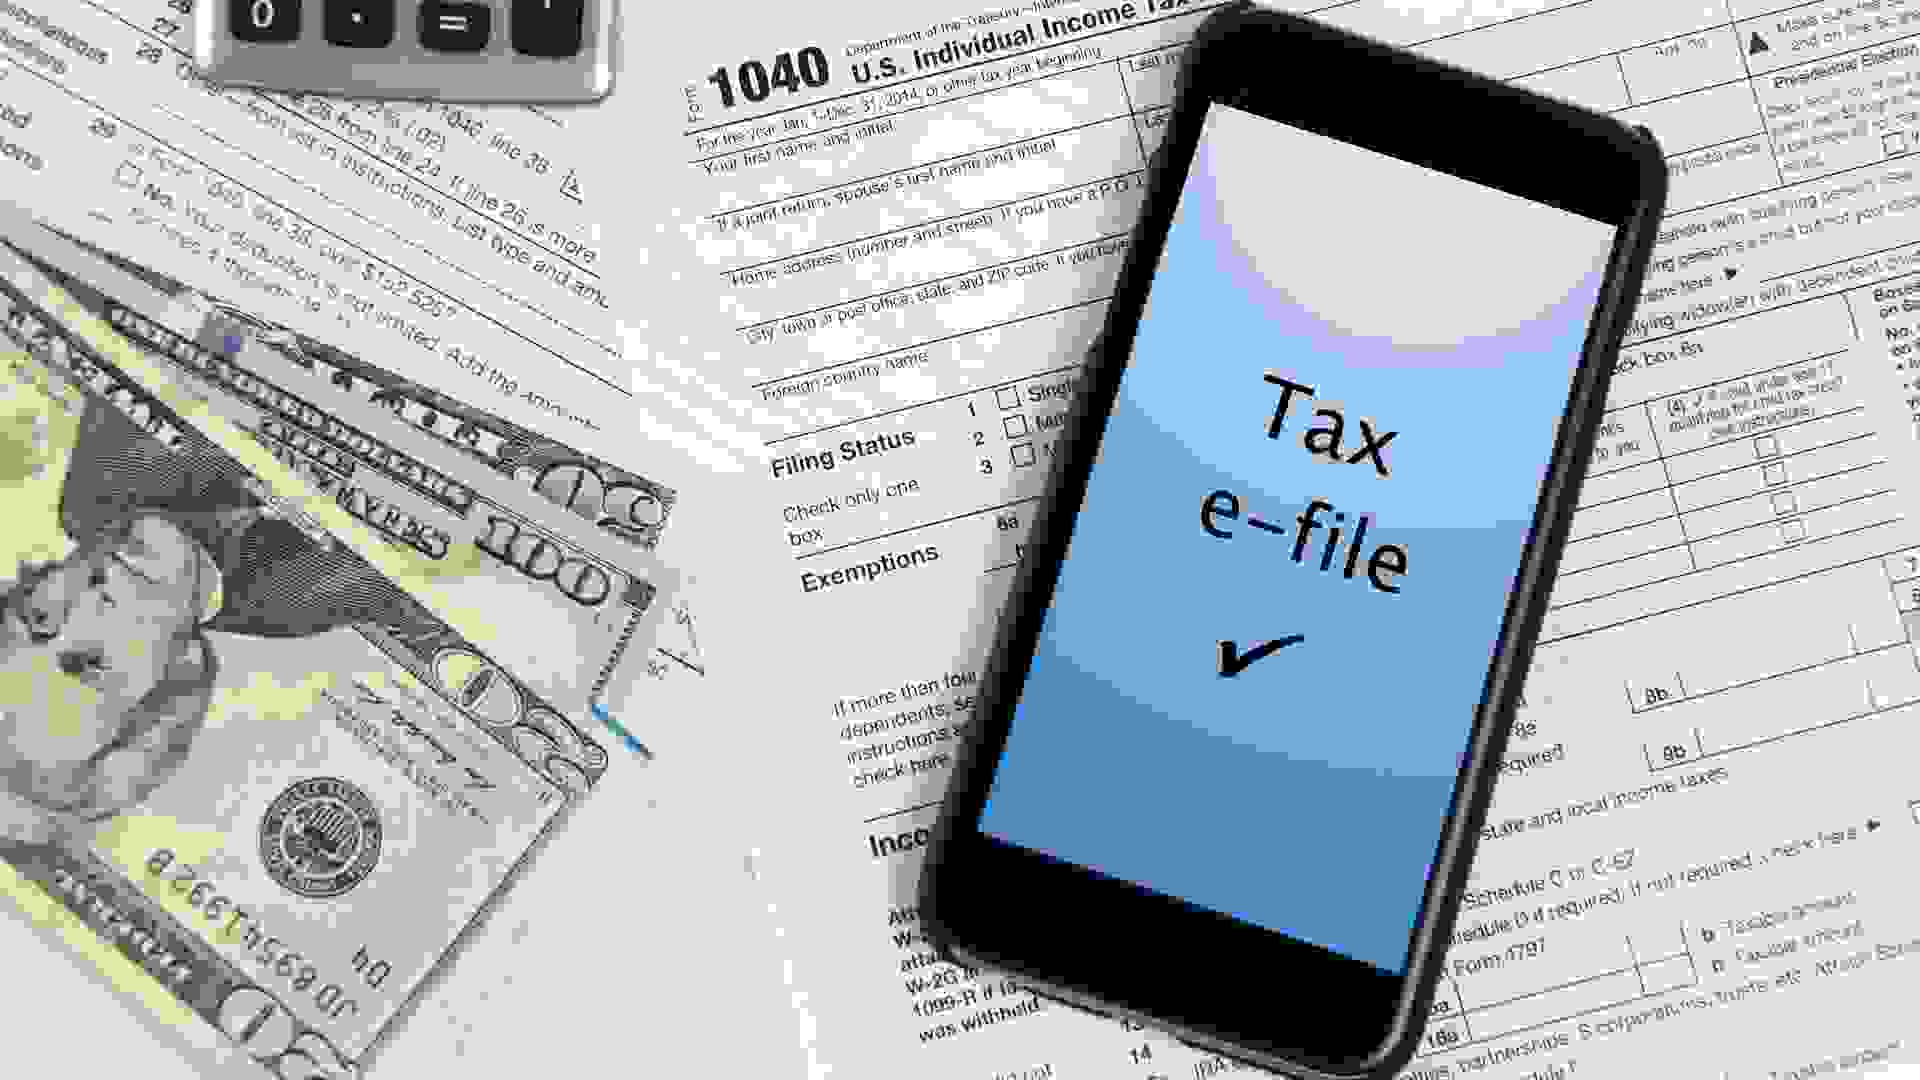 concept for e-file taxes over mobile phone.